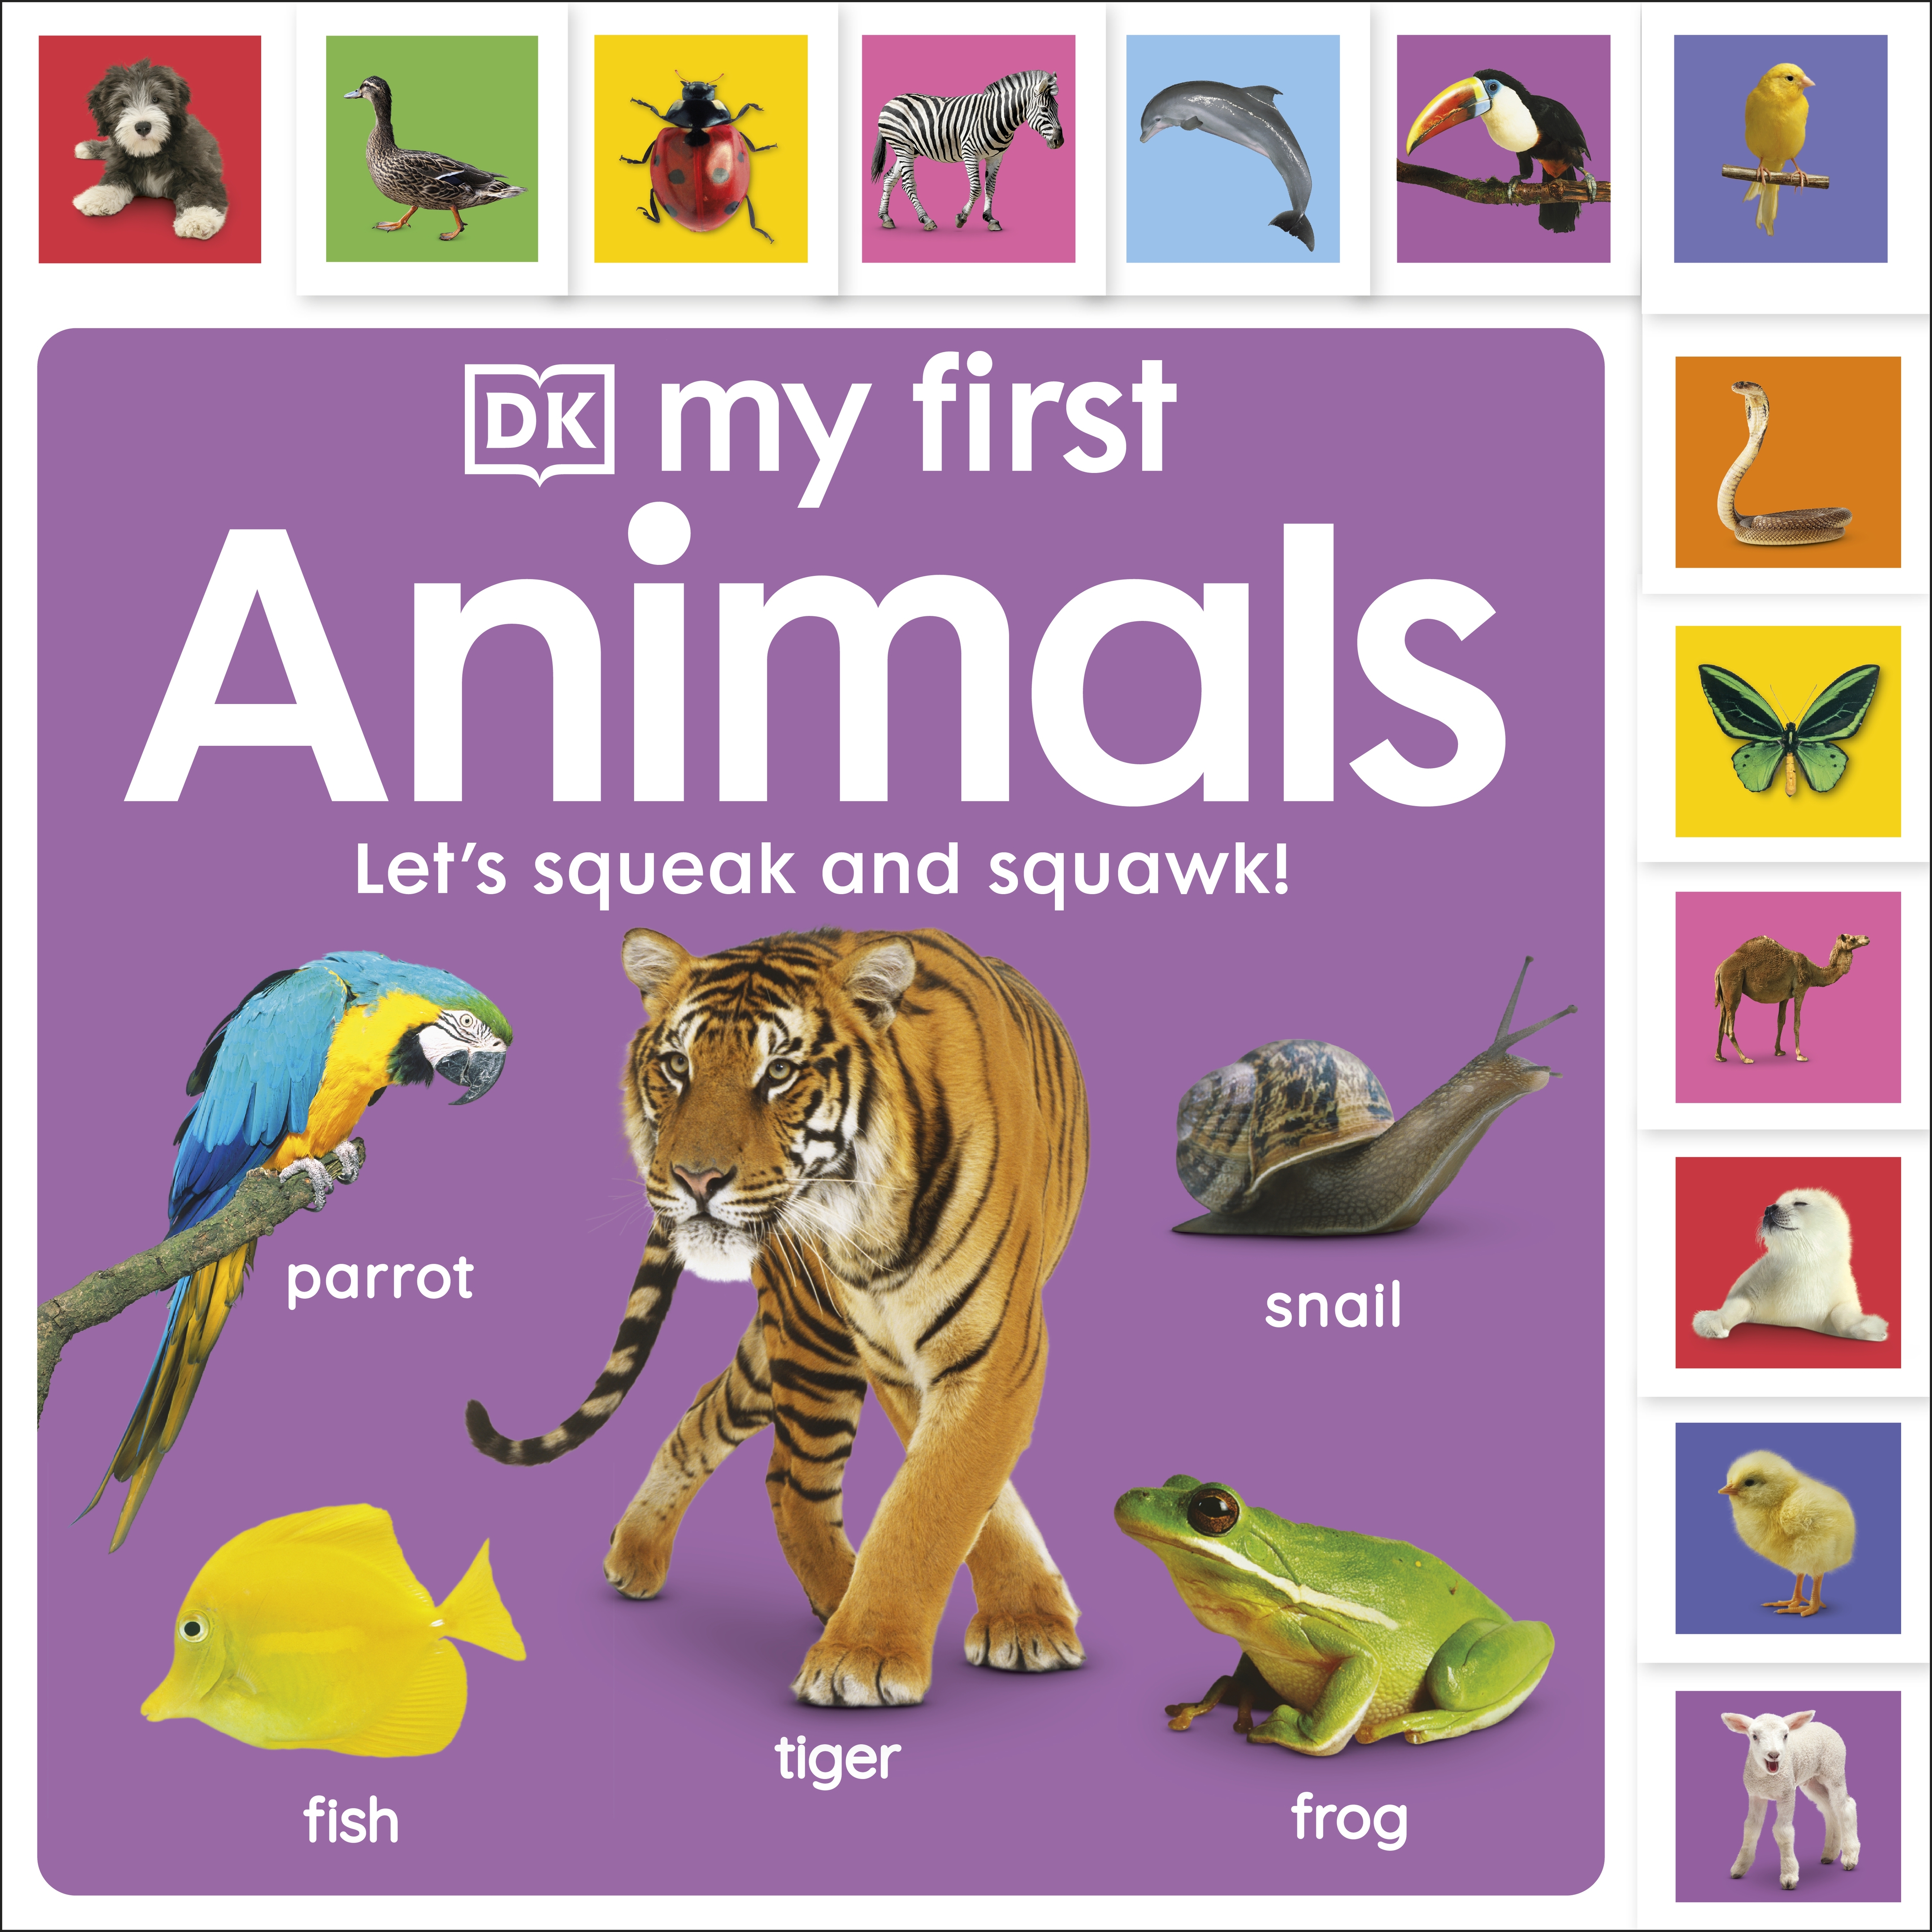 My First Animals: Let's Squeak and Squawk! by DK - Penguin Books New Zealand